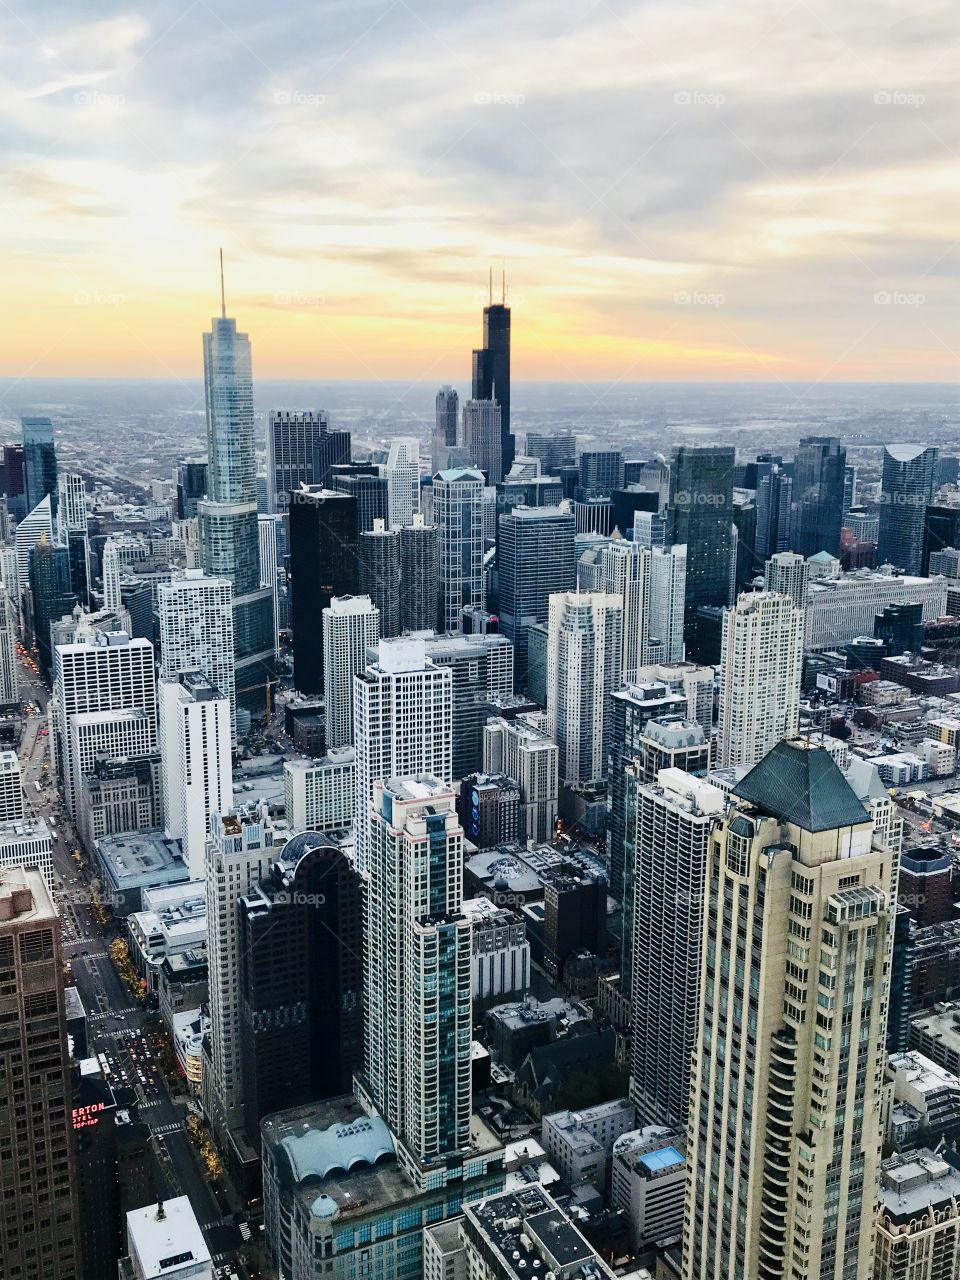 Chicago skyline from the 96th floor of the Signature Lounge in Chicago, Illinois at sunset 